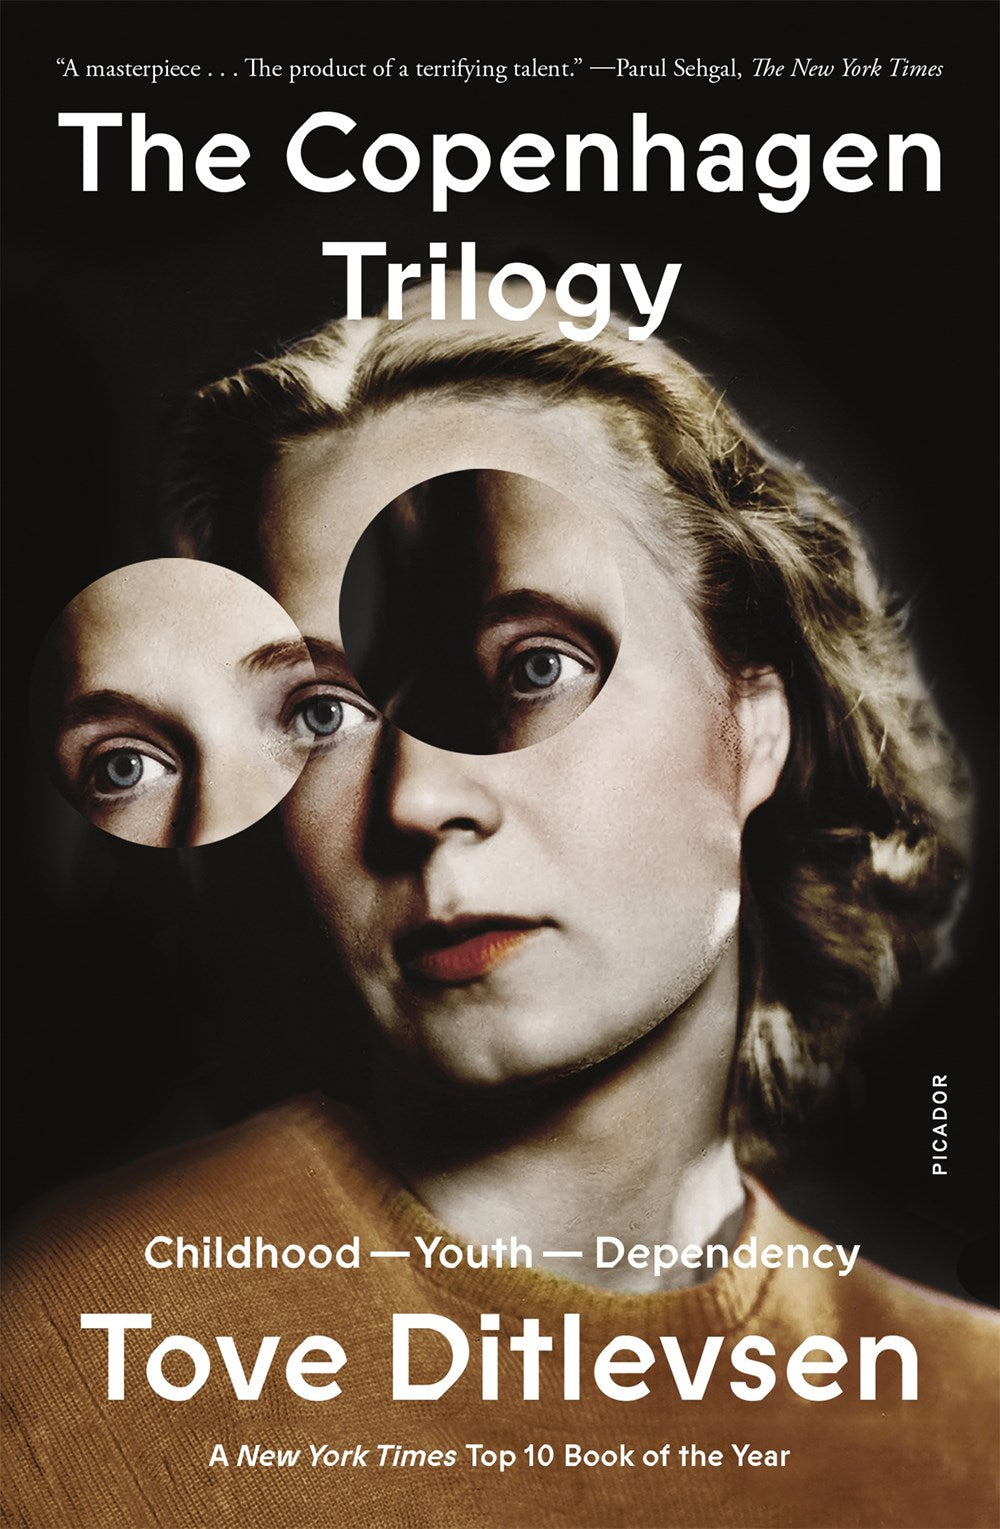 The Copenhagen Trilogy: Childhood, Youth, Dependency by Tove Ditlevsen (Translated by Tiina Nunnally)